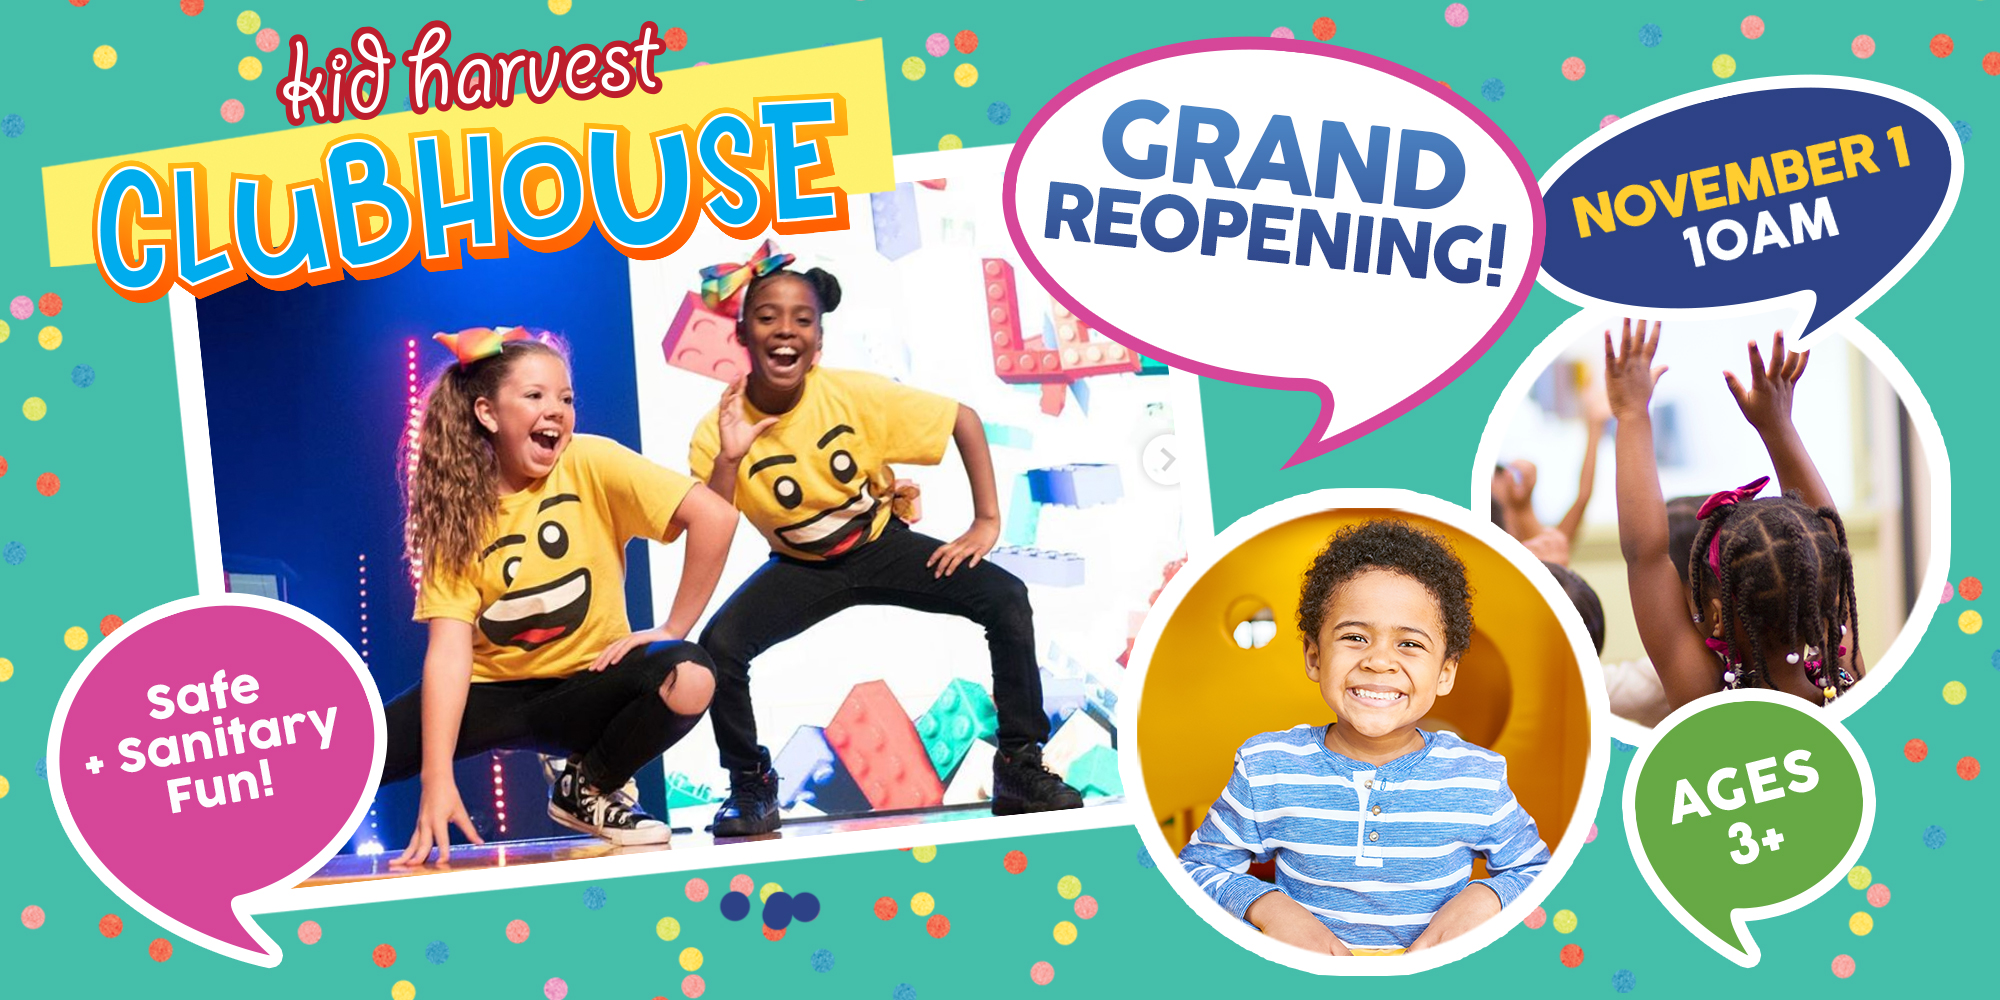 Kid Harvest Clubhouse Grand Reopening! November 1 10AM Safe + Sanitary Fun! Ages 3+